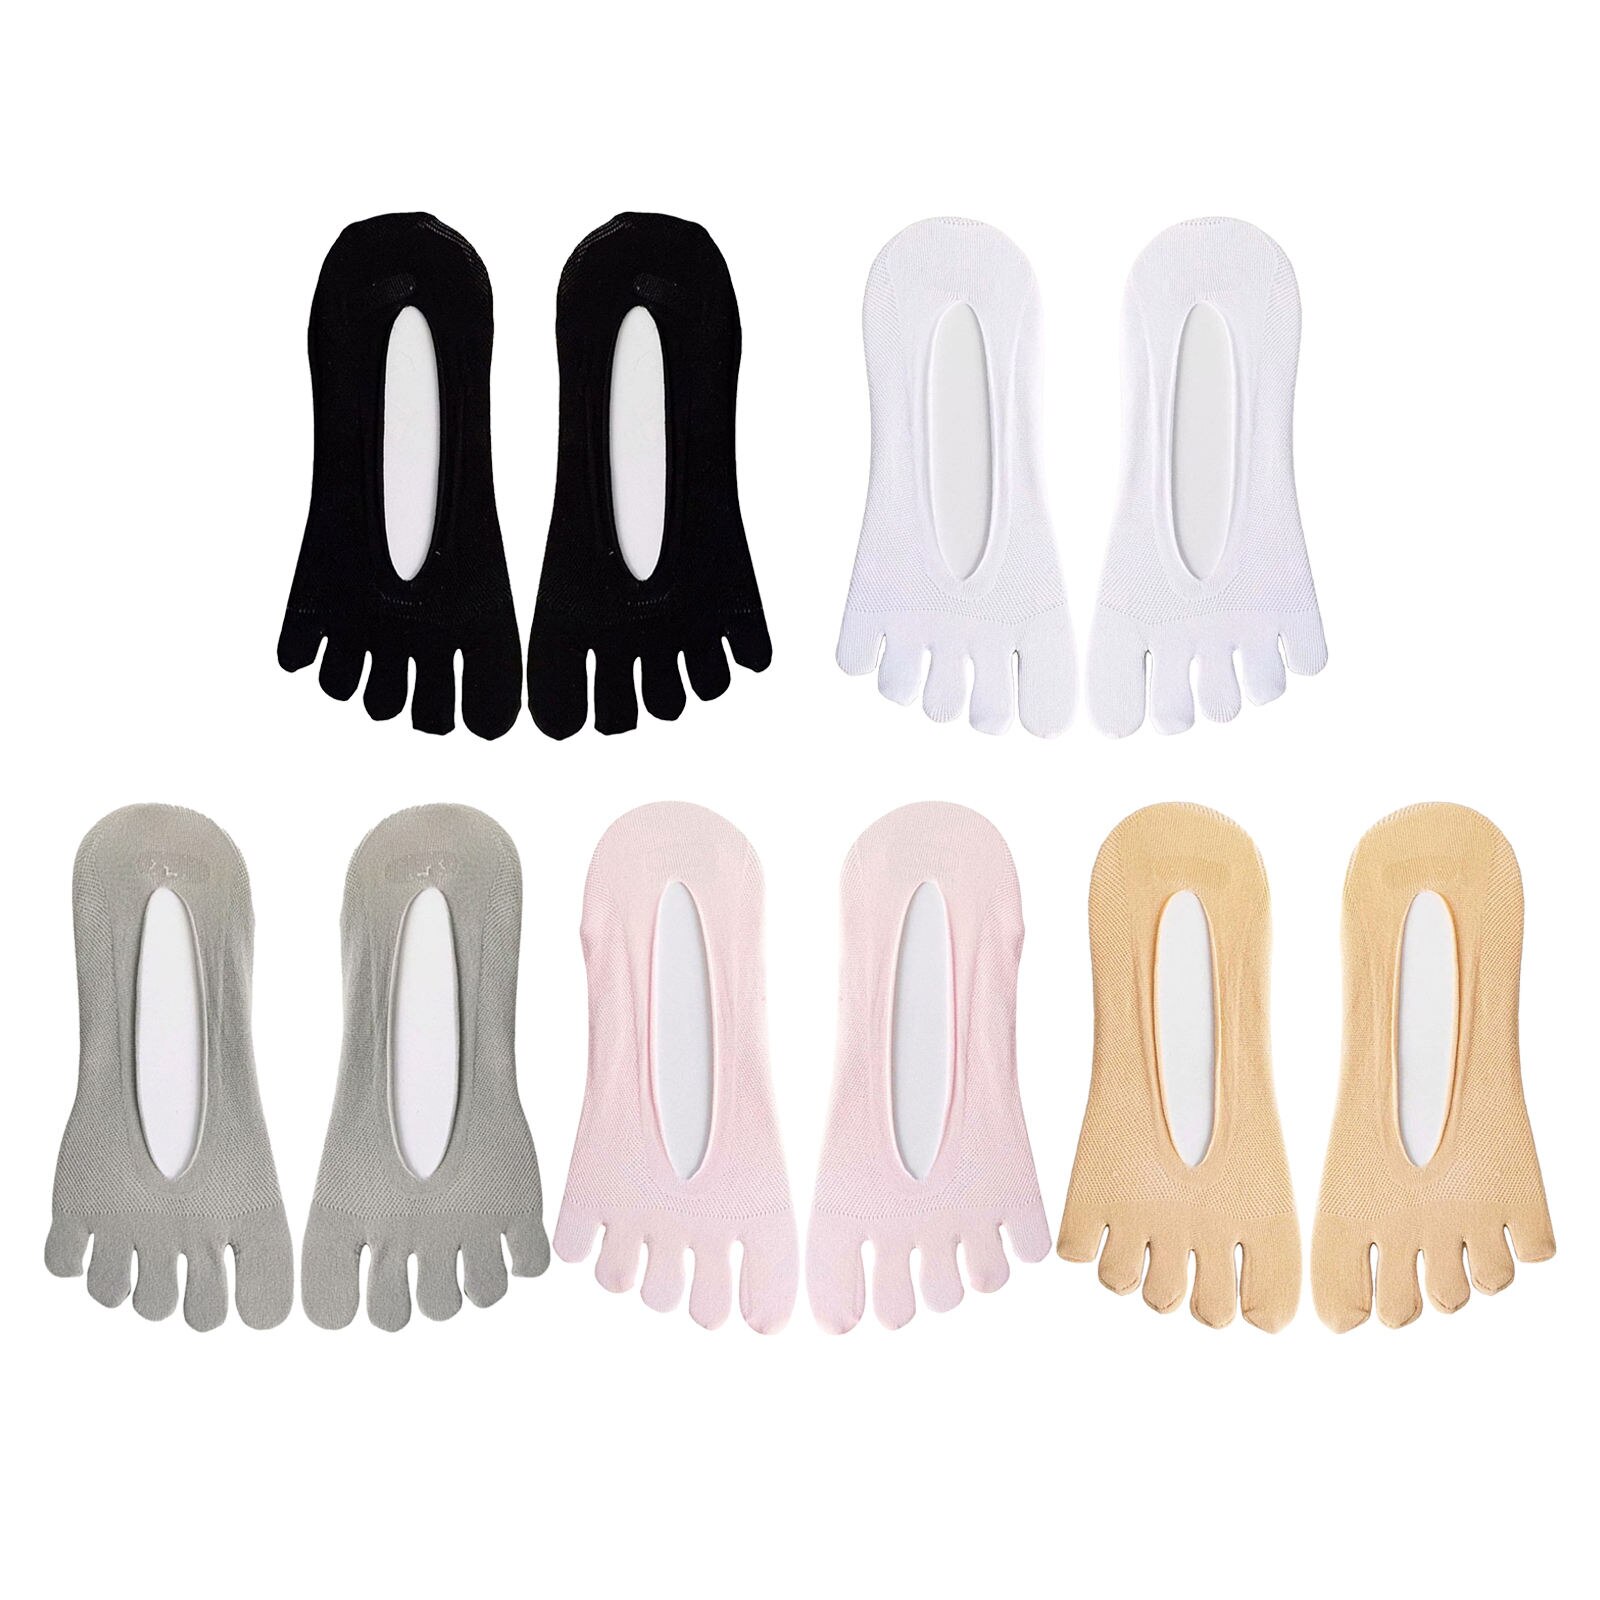 Low Cut No Show Socks Women Girl Invisible for Flats And Dress Shoes Liner Socks with Non- Heel Grips